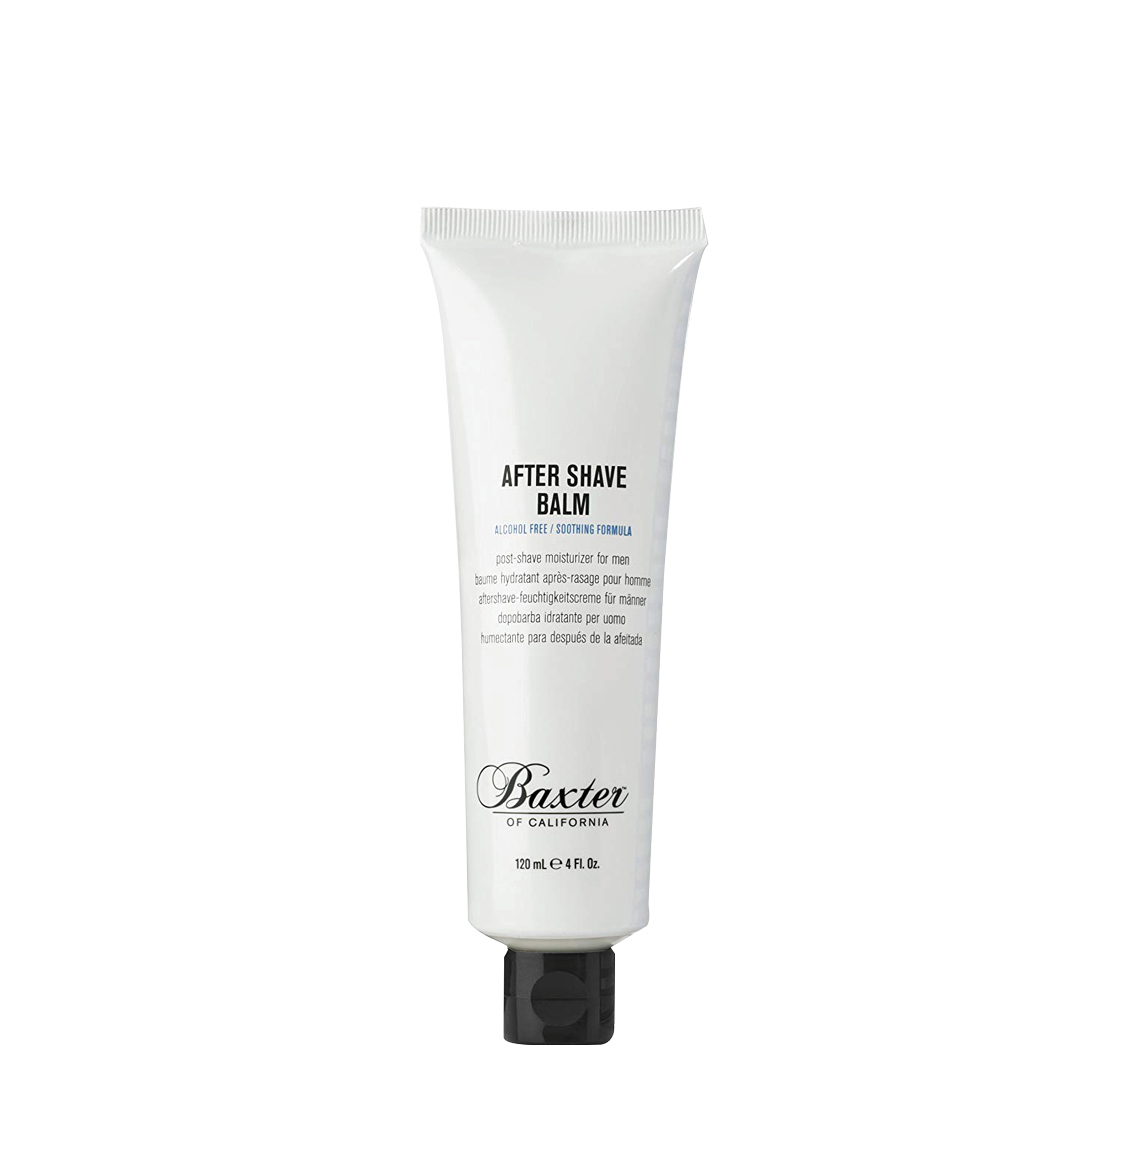 Baxter of California Aftershave Balm 120ml